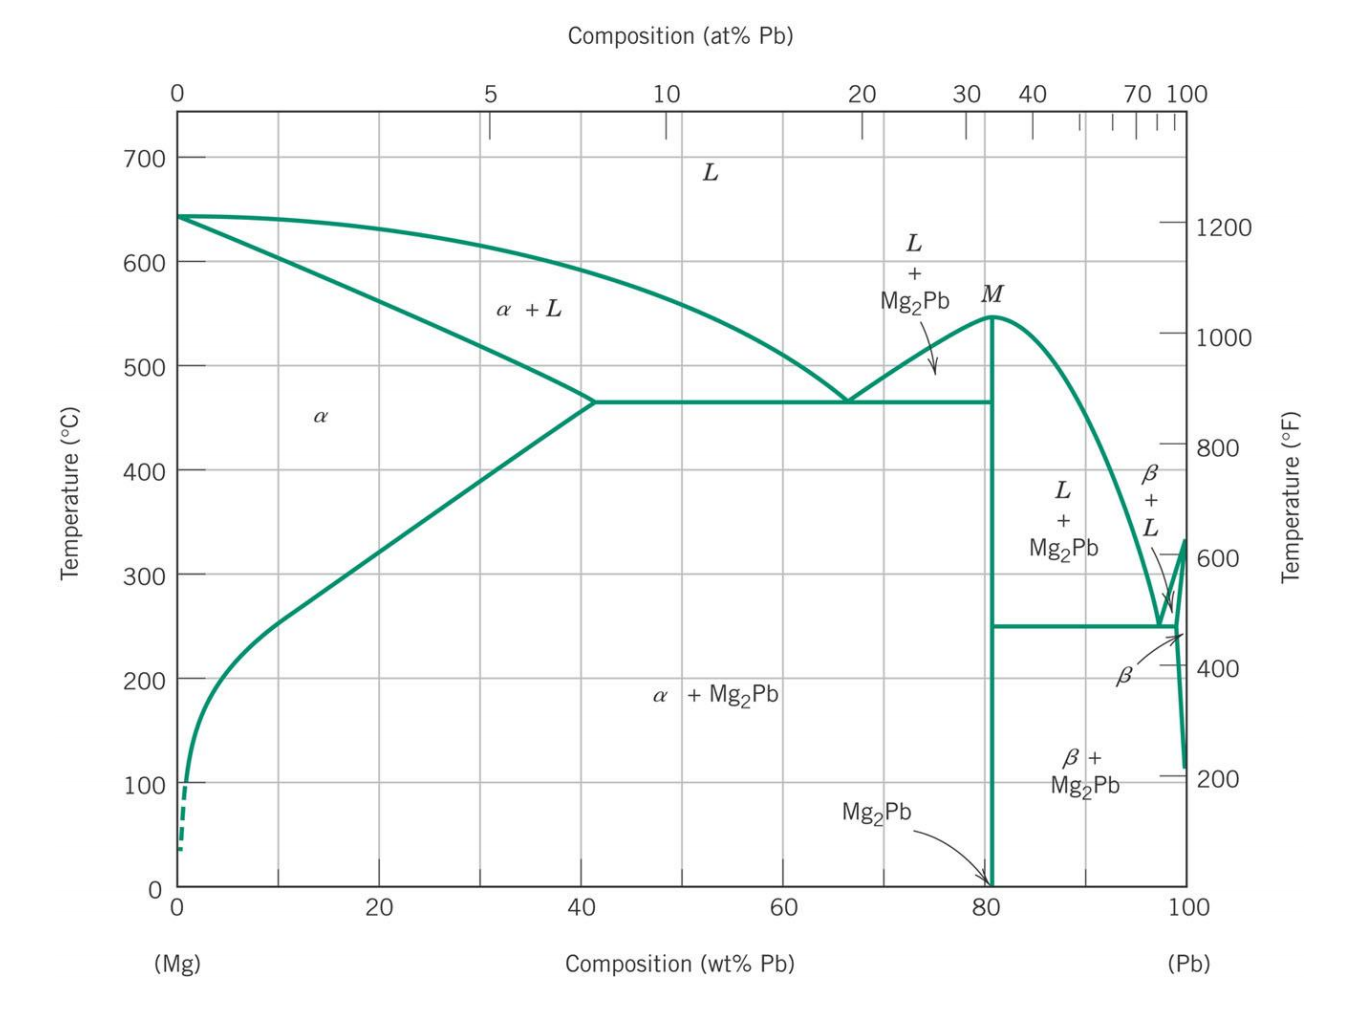 Solved The magnesiumlead (MgPb) phase diagram is shown in